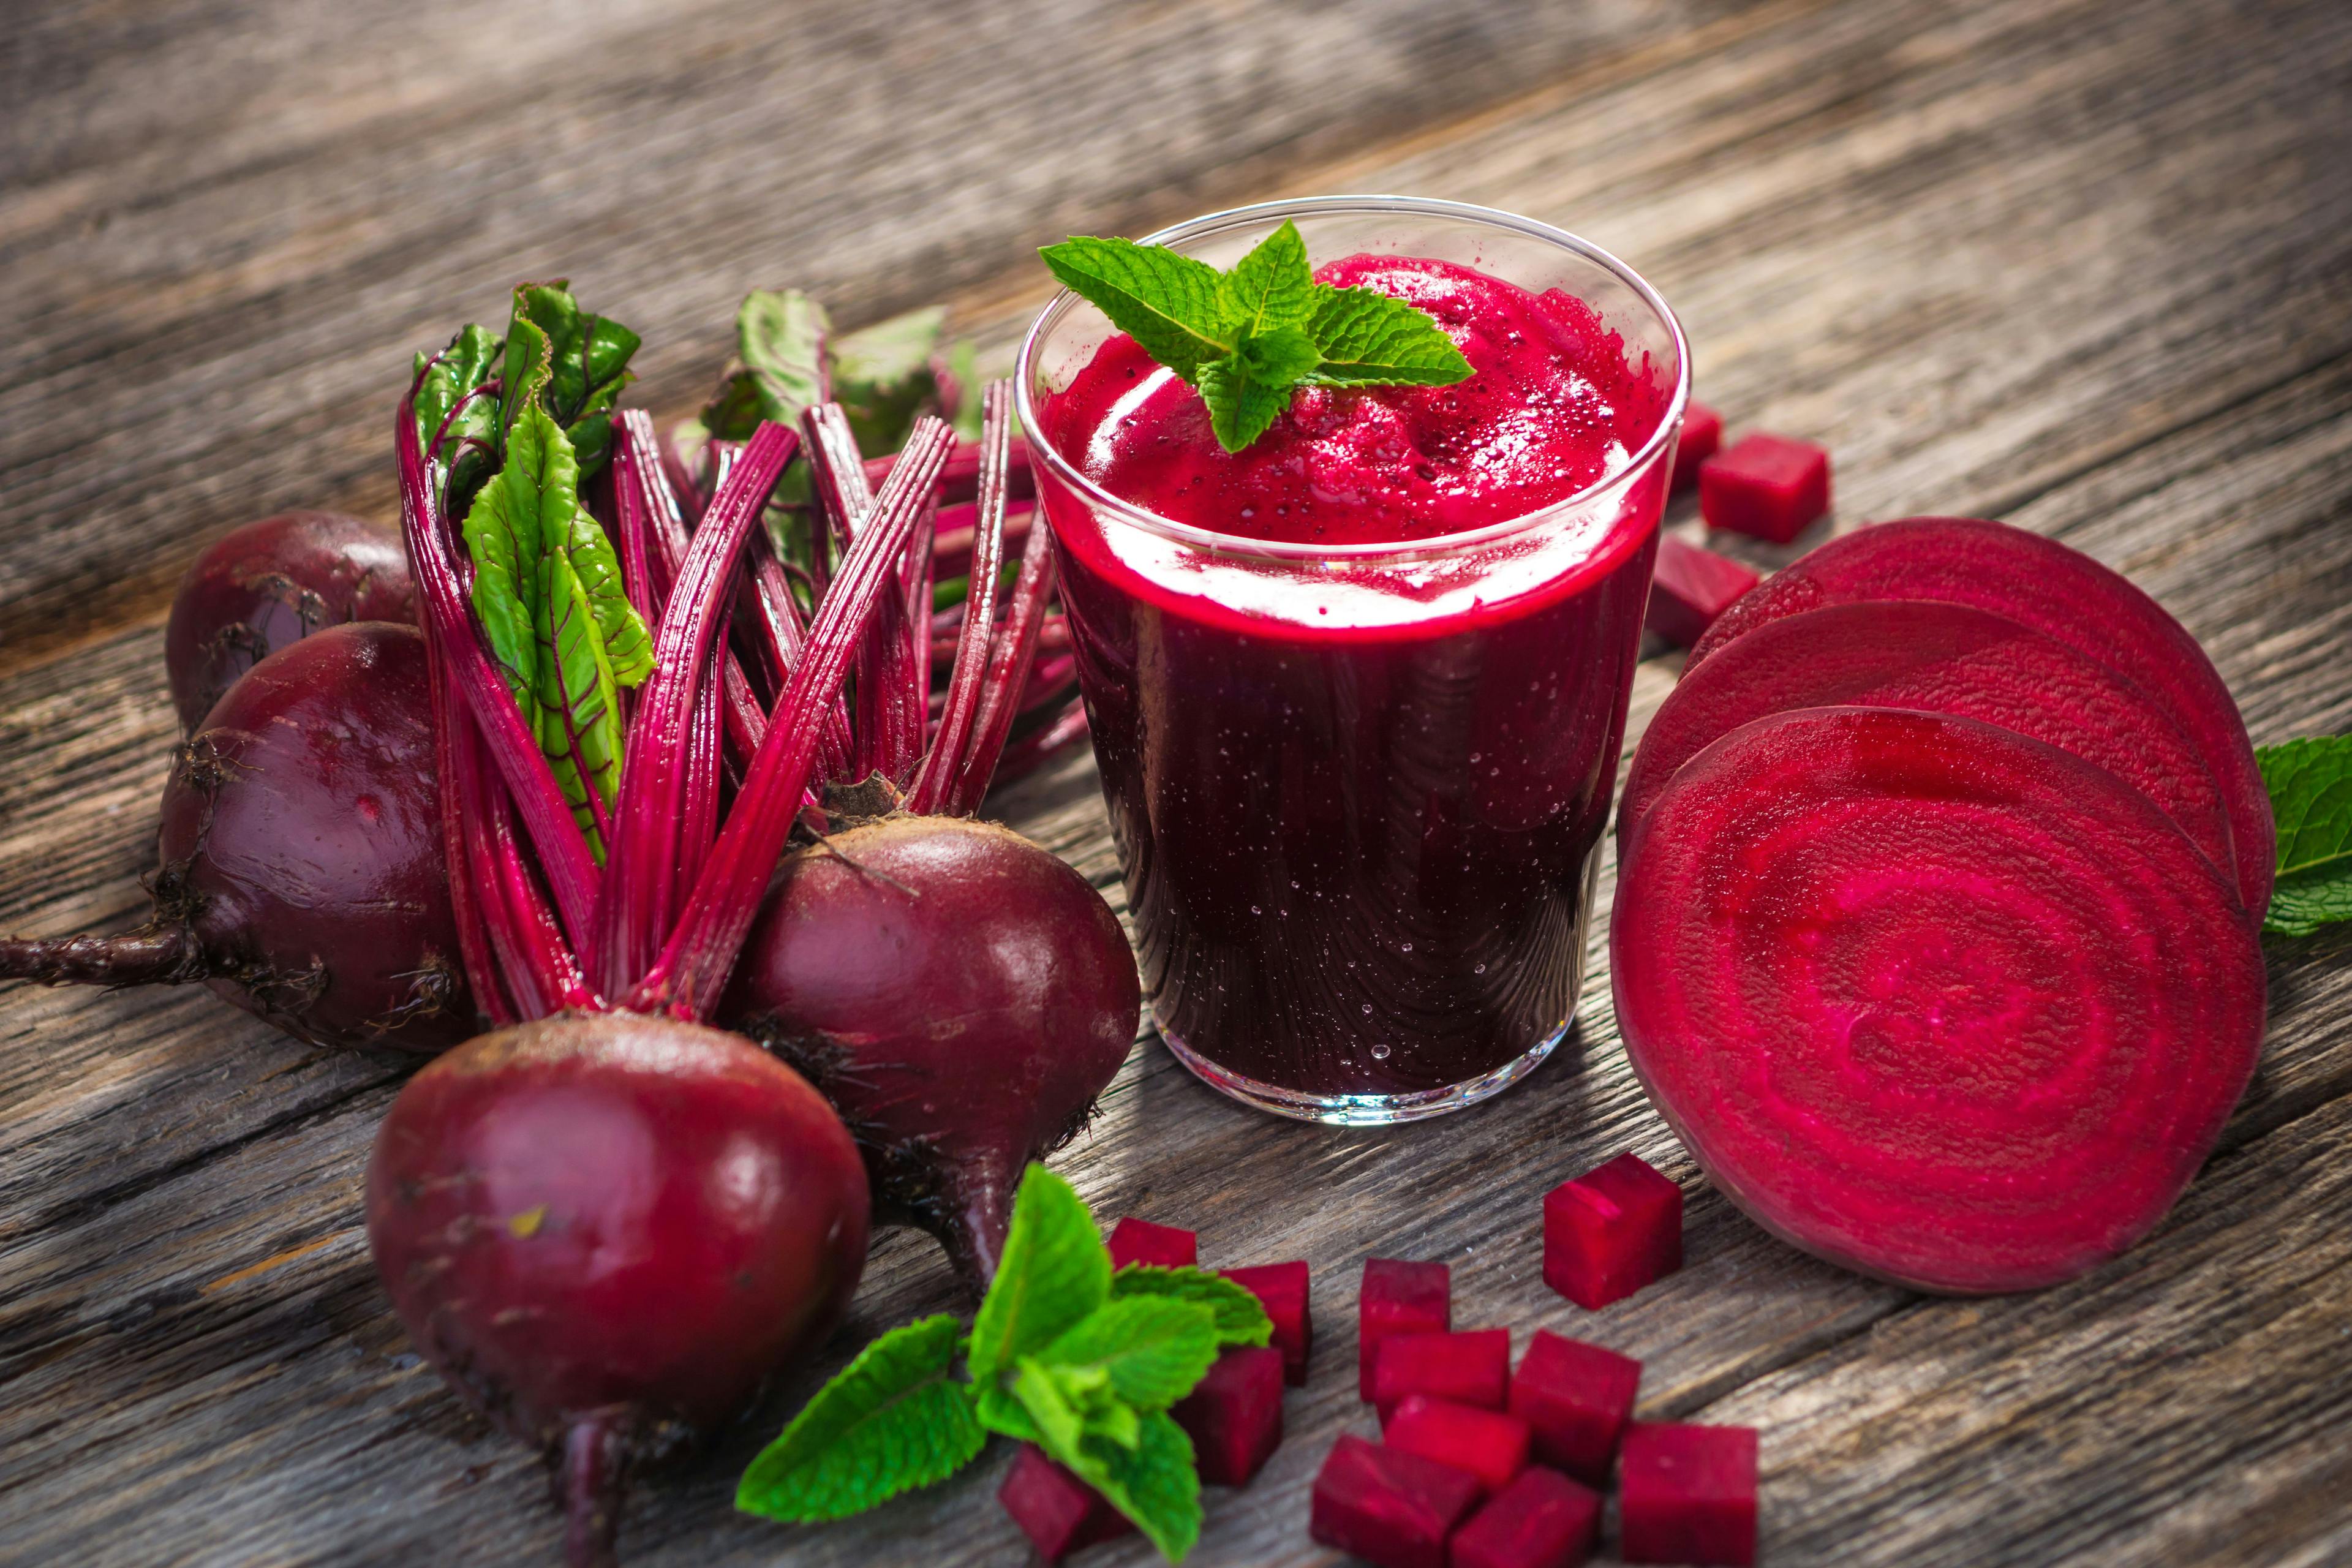 Researchers with Imperial College London evaluated beetroot juice supplementation for systolic blood pressure and walking distance (6 minute) in patients with COPD. Image Credit: © Daniel Vincek - stock.adobe.com